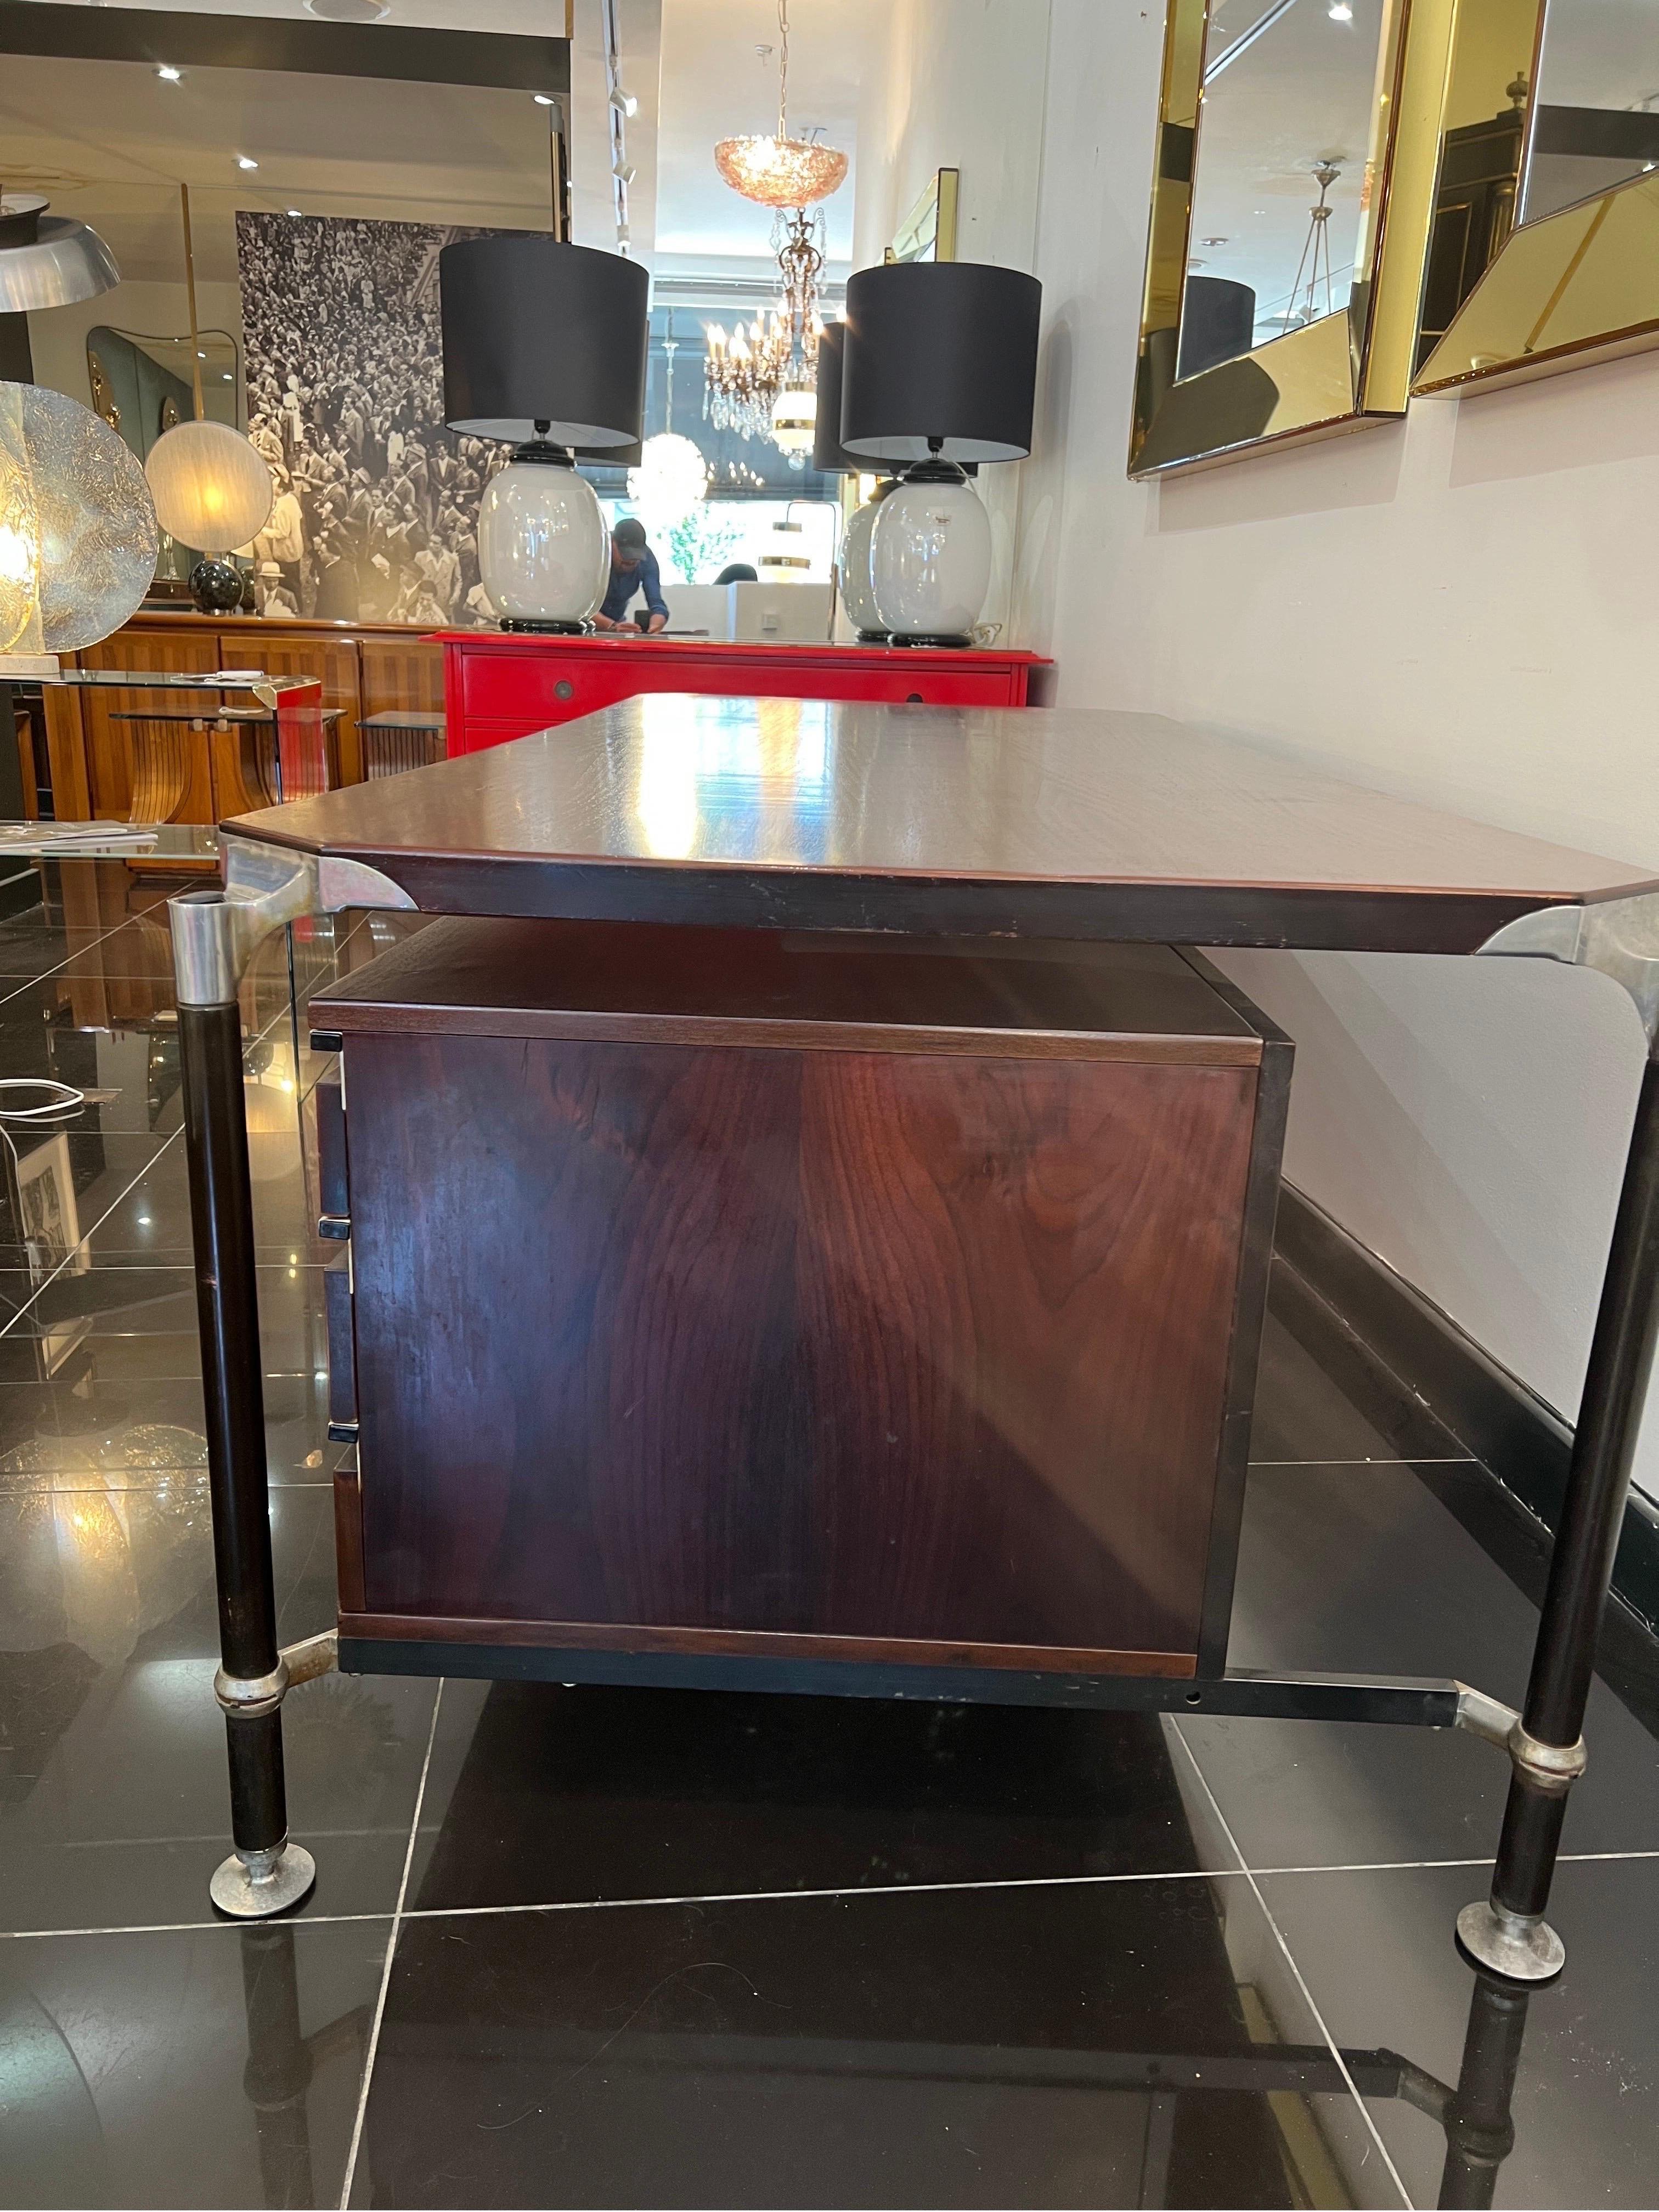 An extra large rosewood executive desk designed by ico Parisi for MIM Rome in 1962 . Structure made from lacquered steel with aluminium supports , there’re three floating drawers to the side with aluminium handles . The rear is a full size recessed